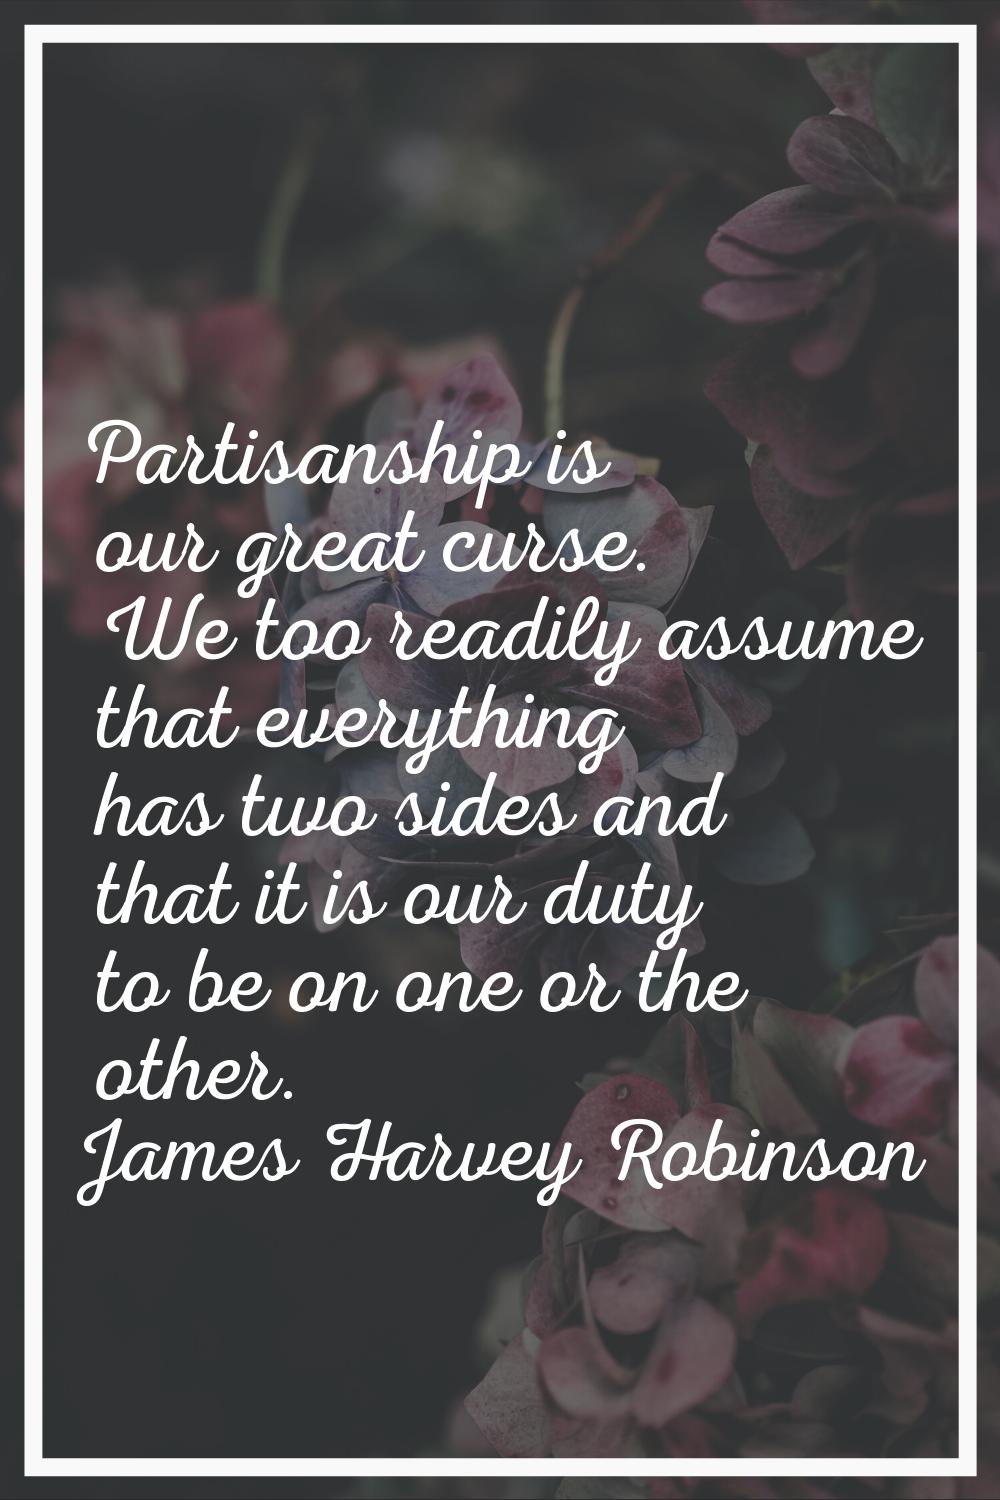 Partisanship is our great curse. We too readily assume that everything has two sides and that it is